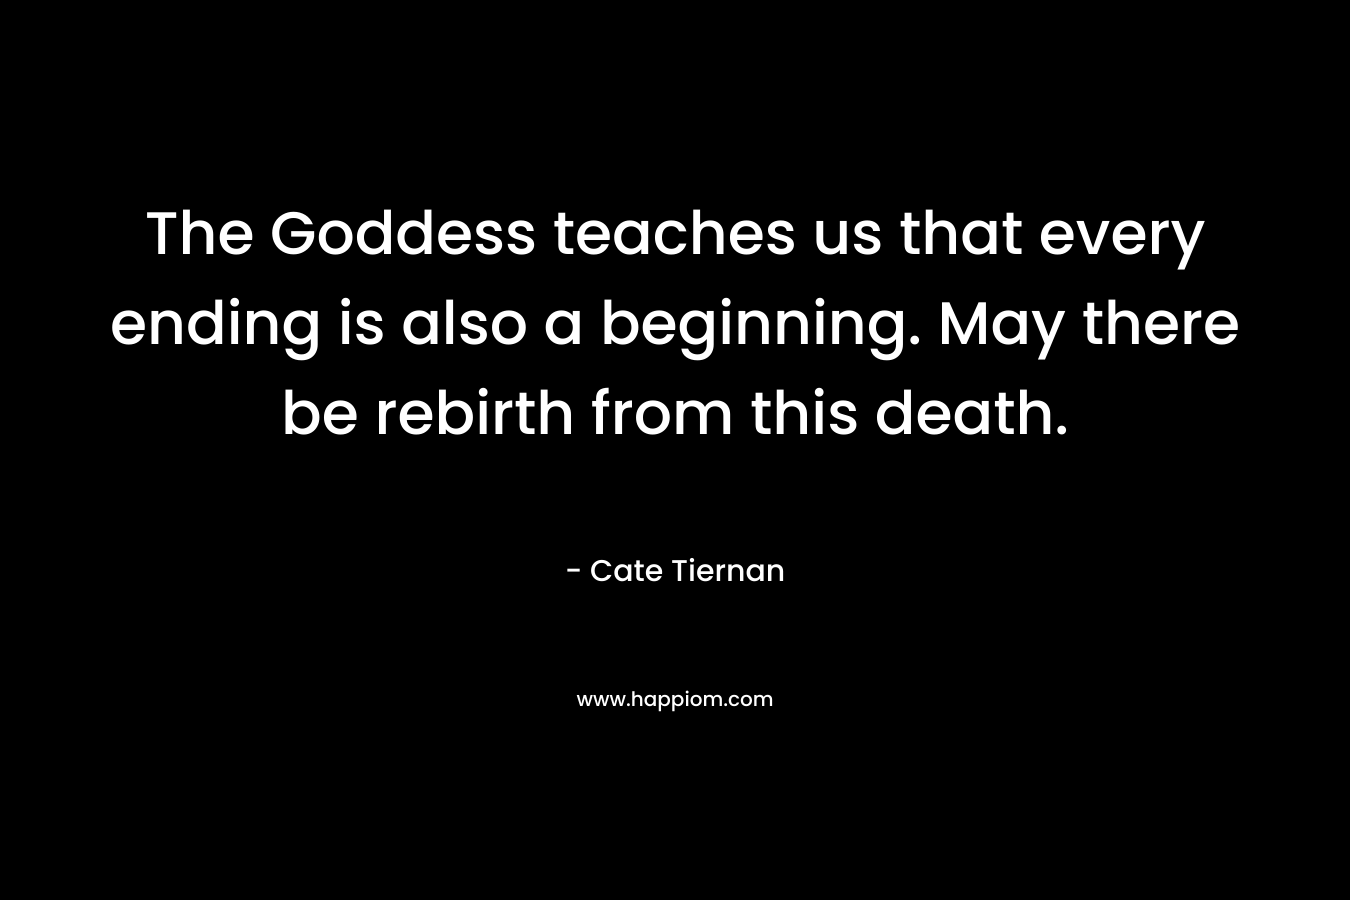 The Goddess teaches us that every ending is also a beginning. May there be rebirth from this death.